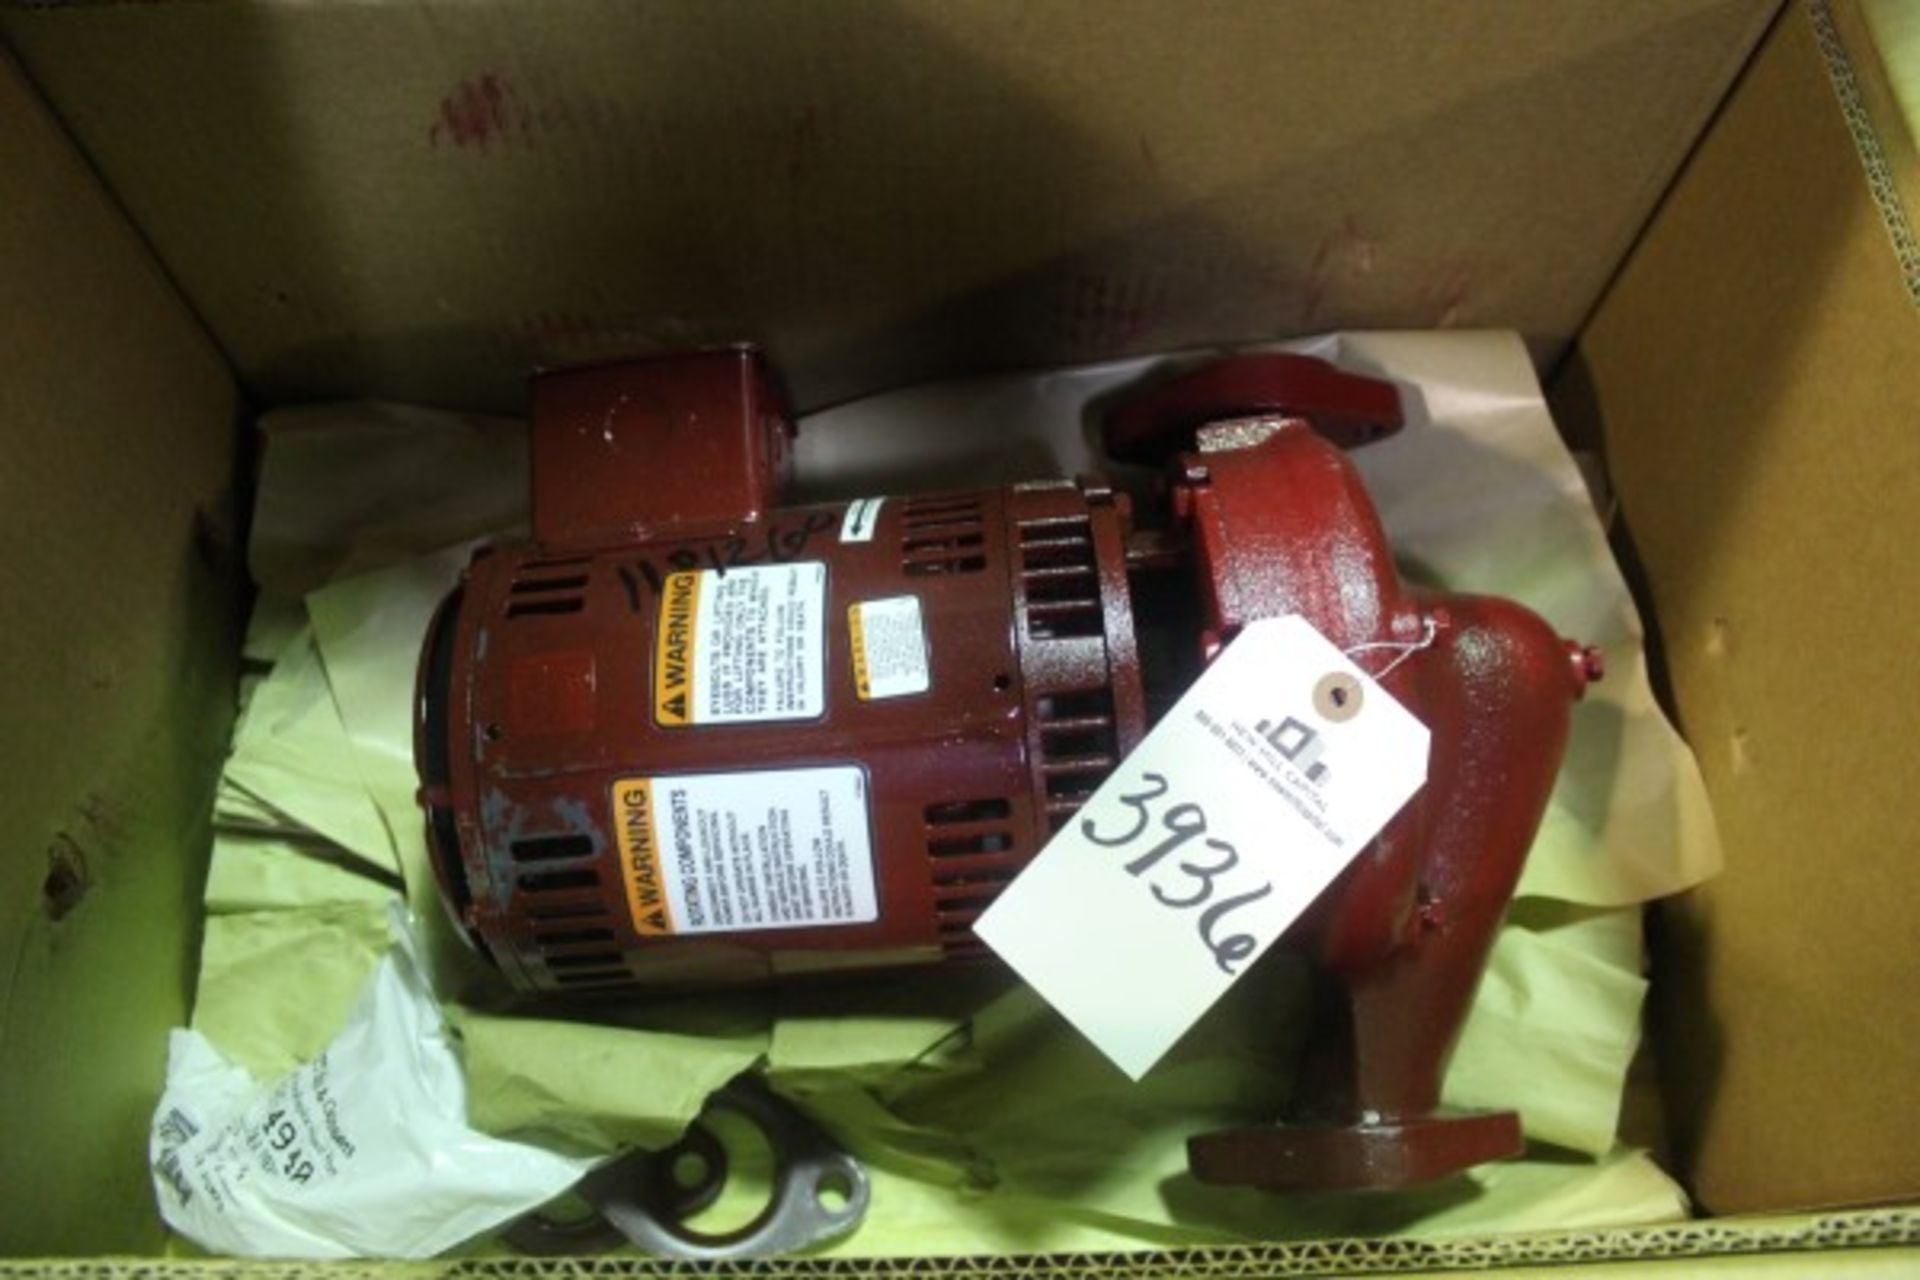 Bell & Gossett 1 1/2" Transfer Pump | Seller to load for $10 per lot or buyers may remove hand carry